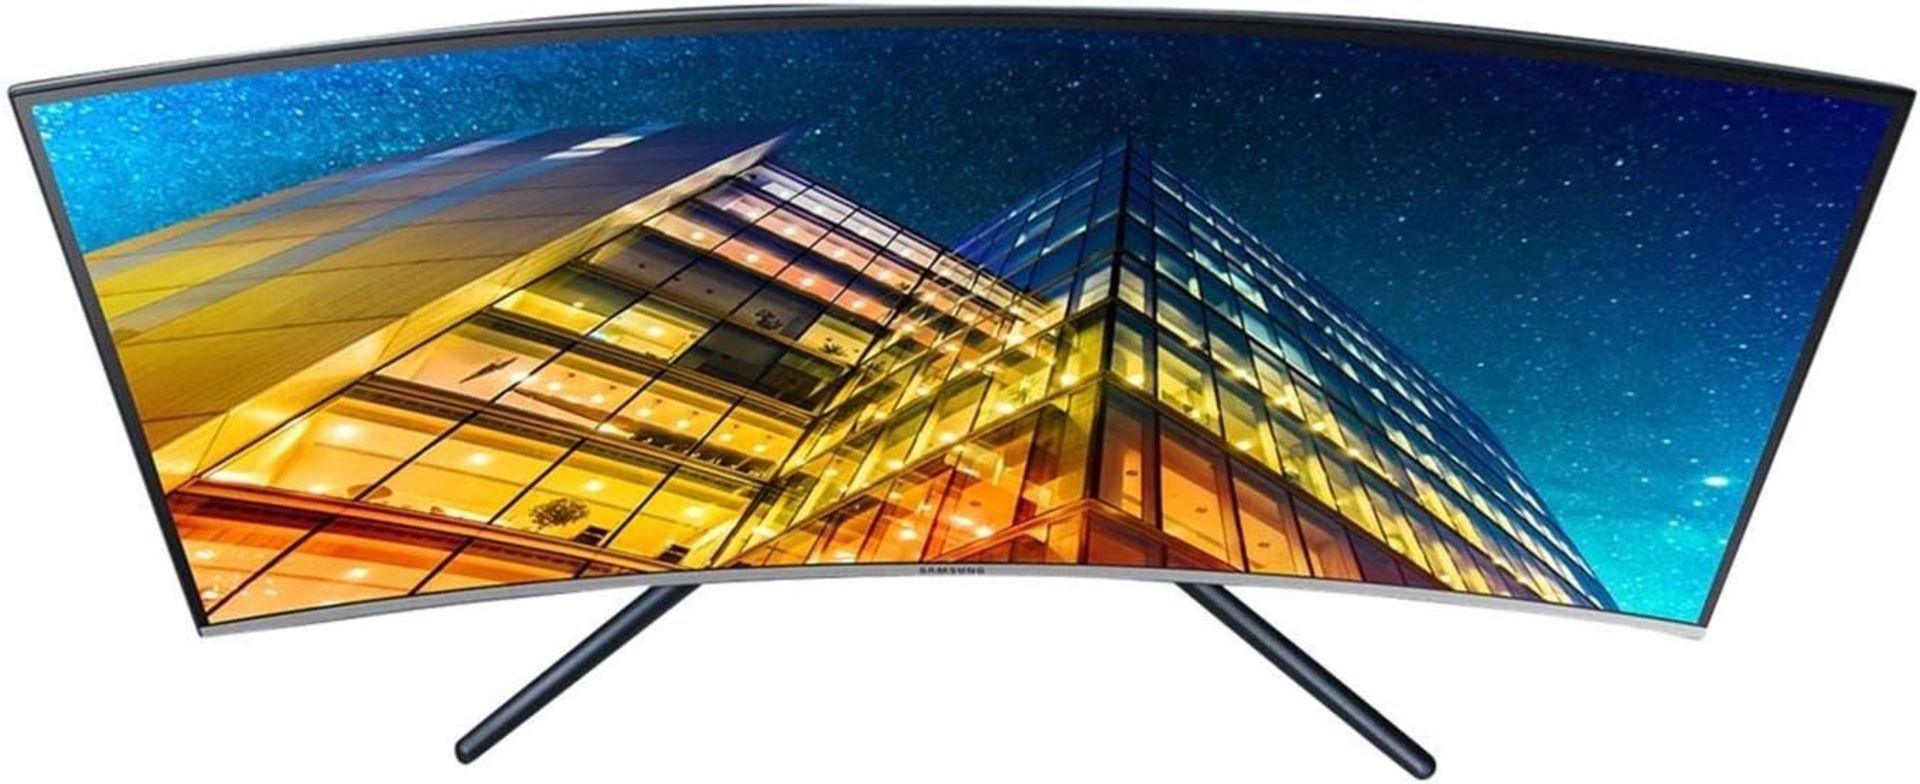 NEW & BOXED SAMSUNG U32R590CWP 32 Inch Curved 4K Monitor. RRP £325. (PCKBW). With 4x more pixels - Image 3 of 5